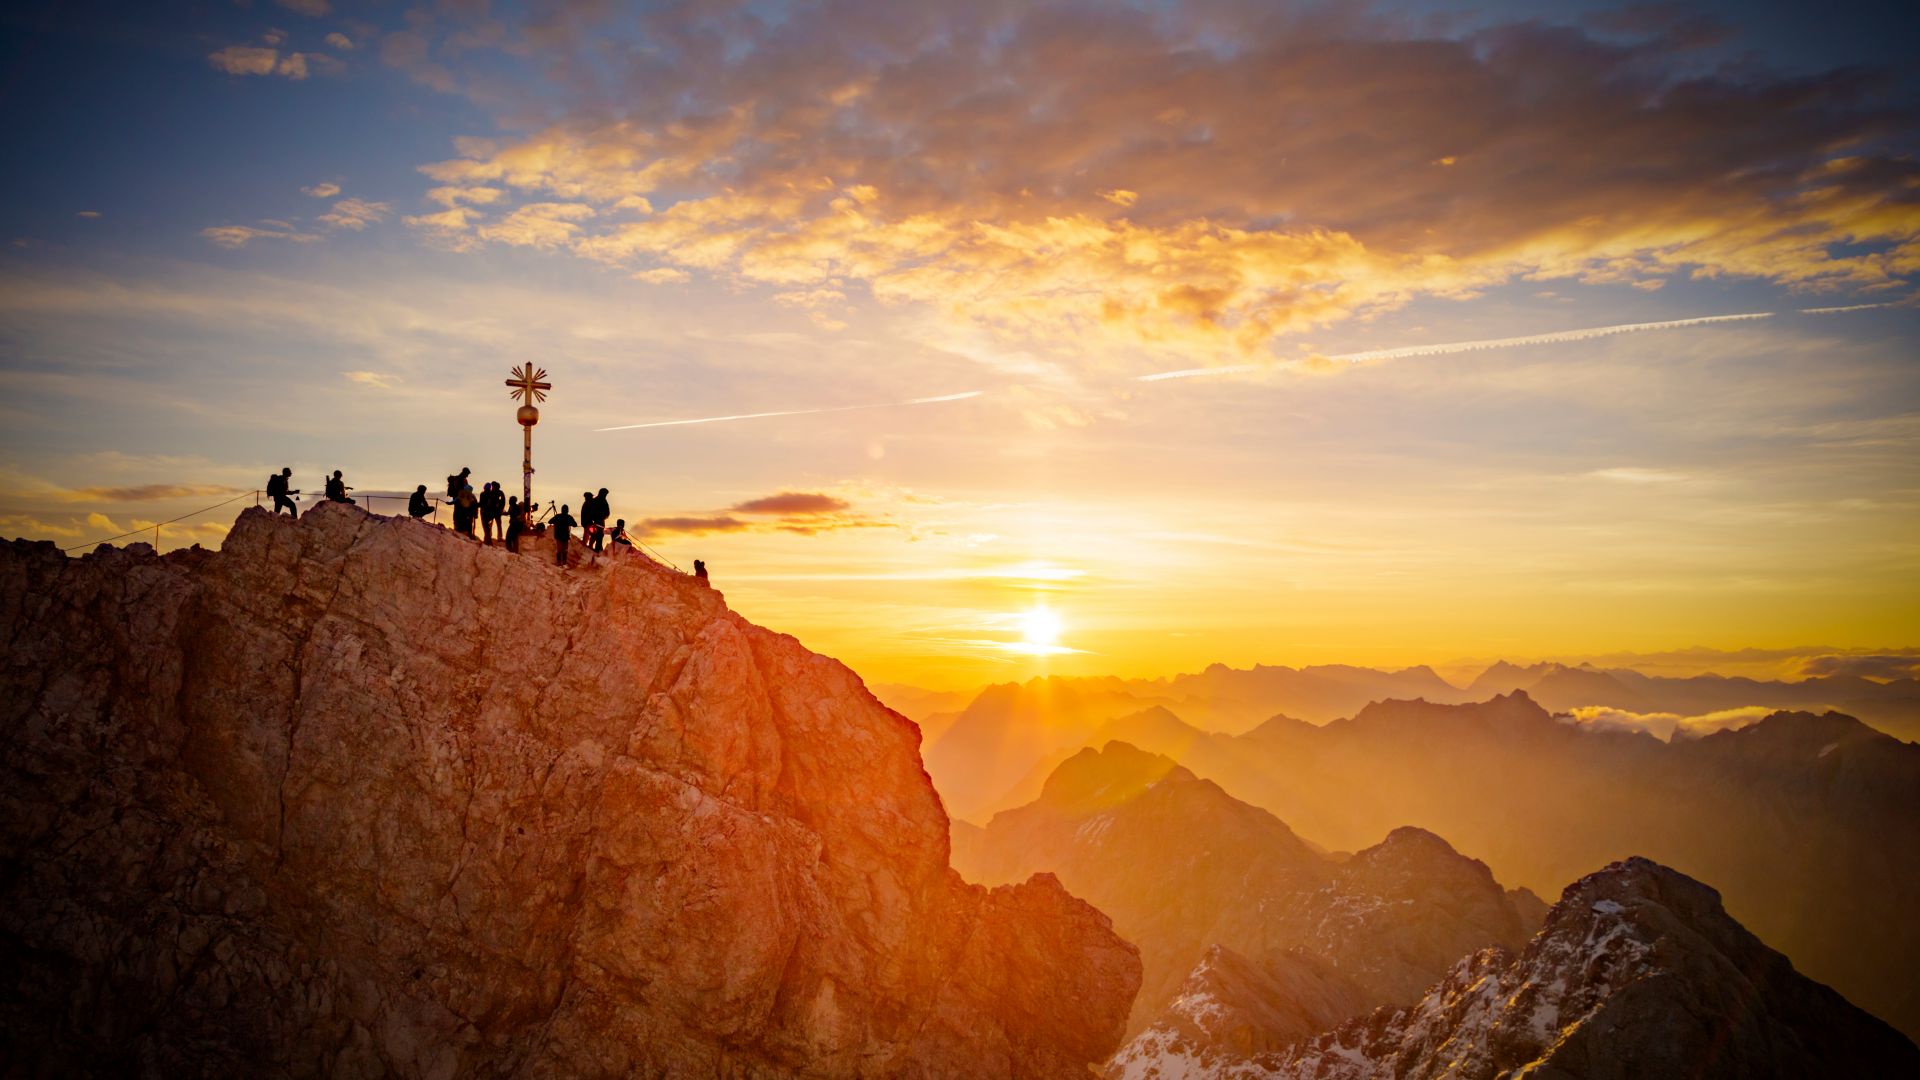 Zugspitze: summit of Mount Zugspitze, Germany's highest mountain in front of the rising sun.